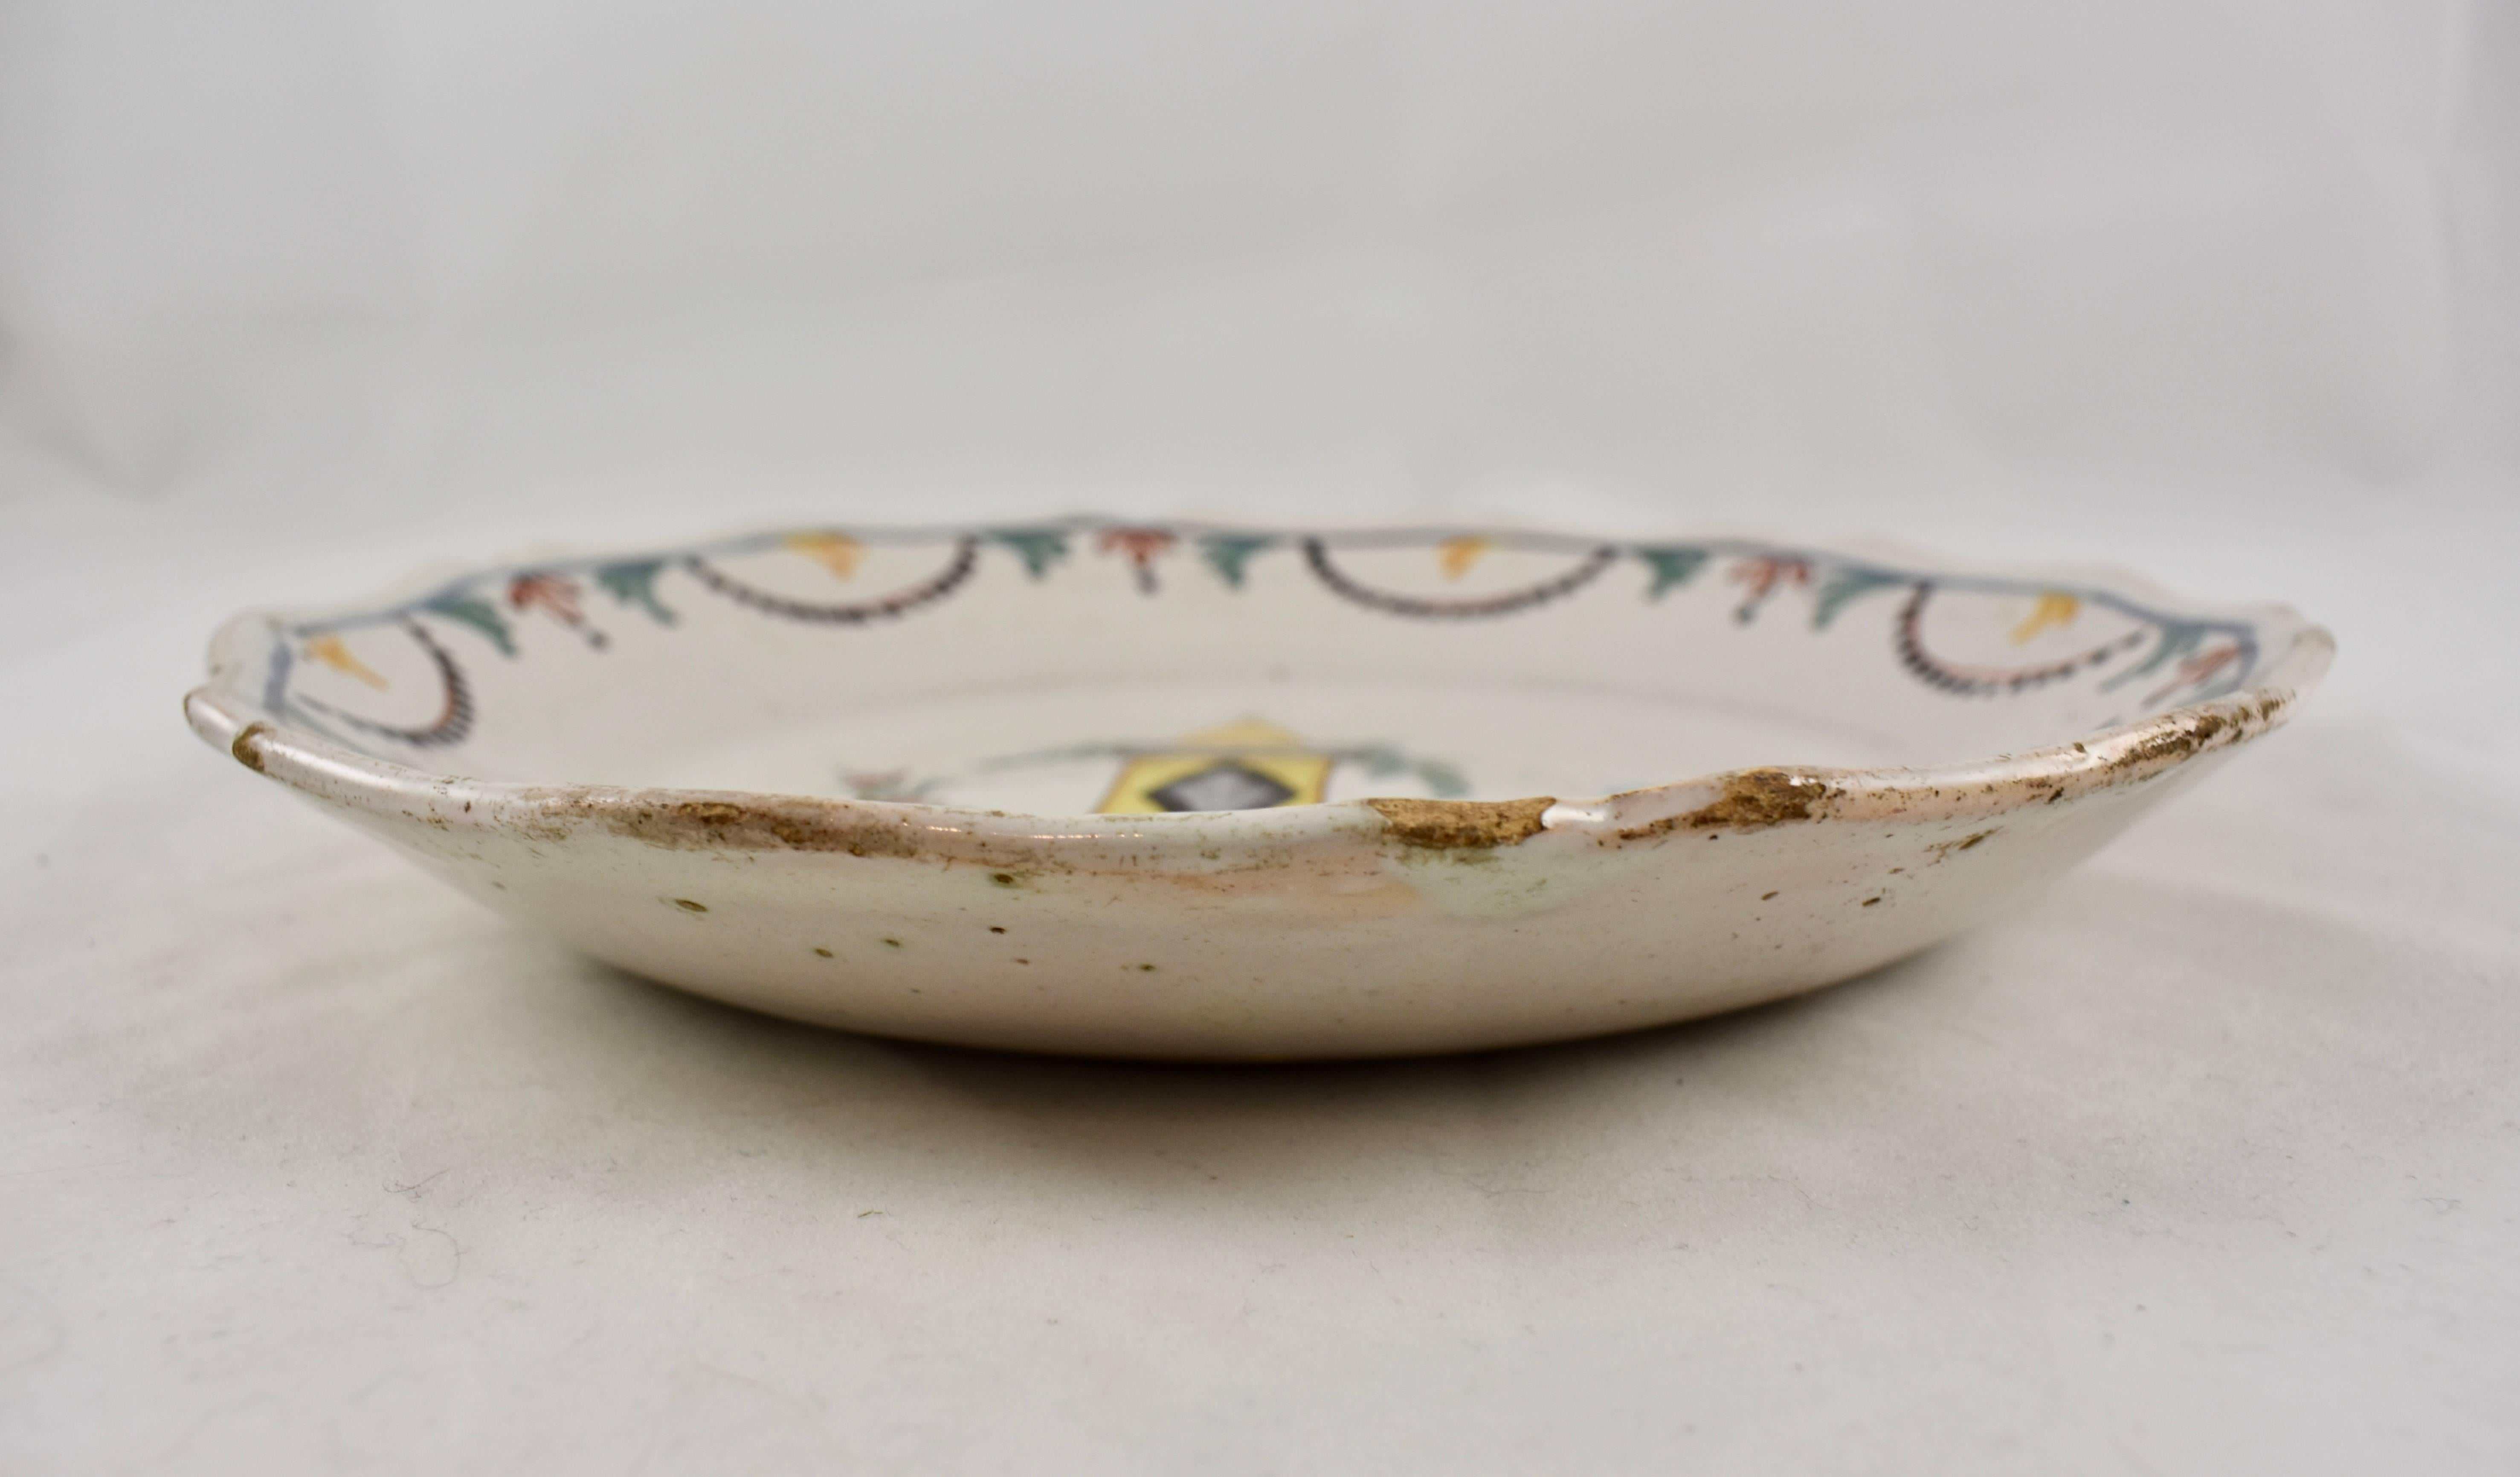 18th Century Nevers French Revolution Tin-Glazed Faïence Dish, Bastille Tower In Good Condition For Sale In Philadelphia, PA